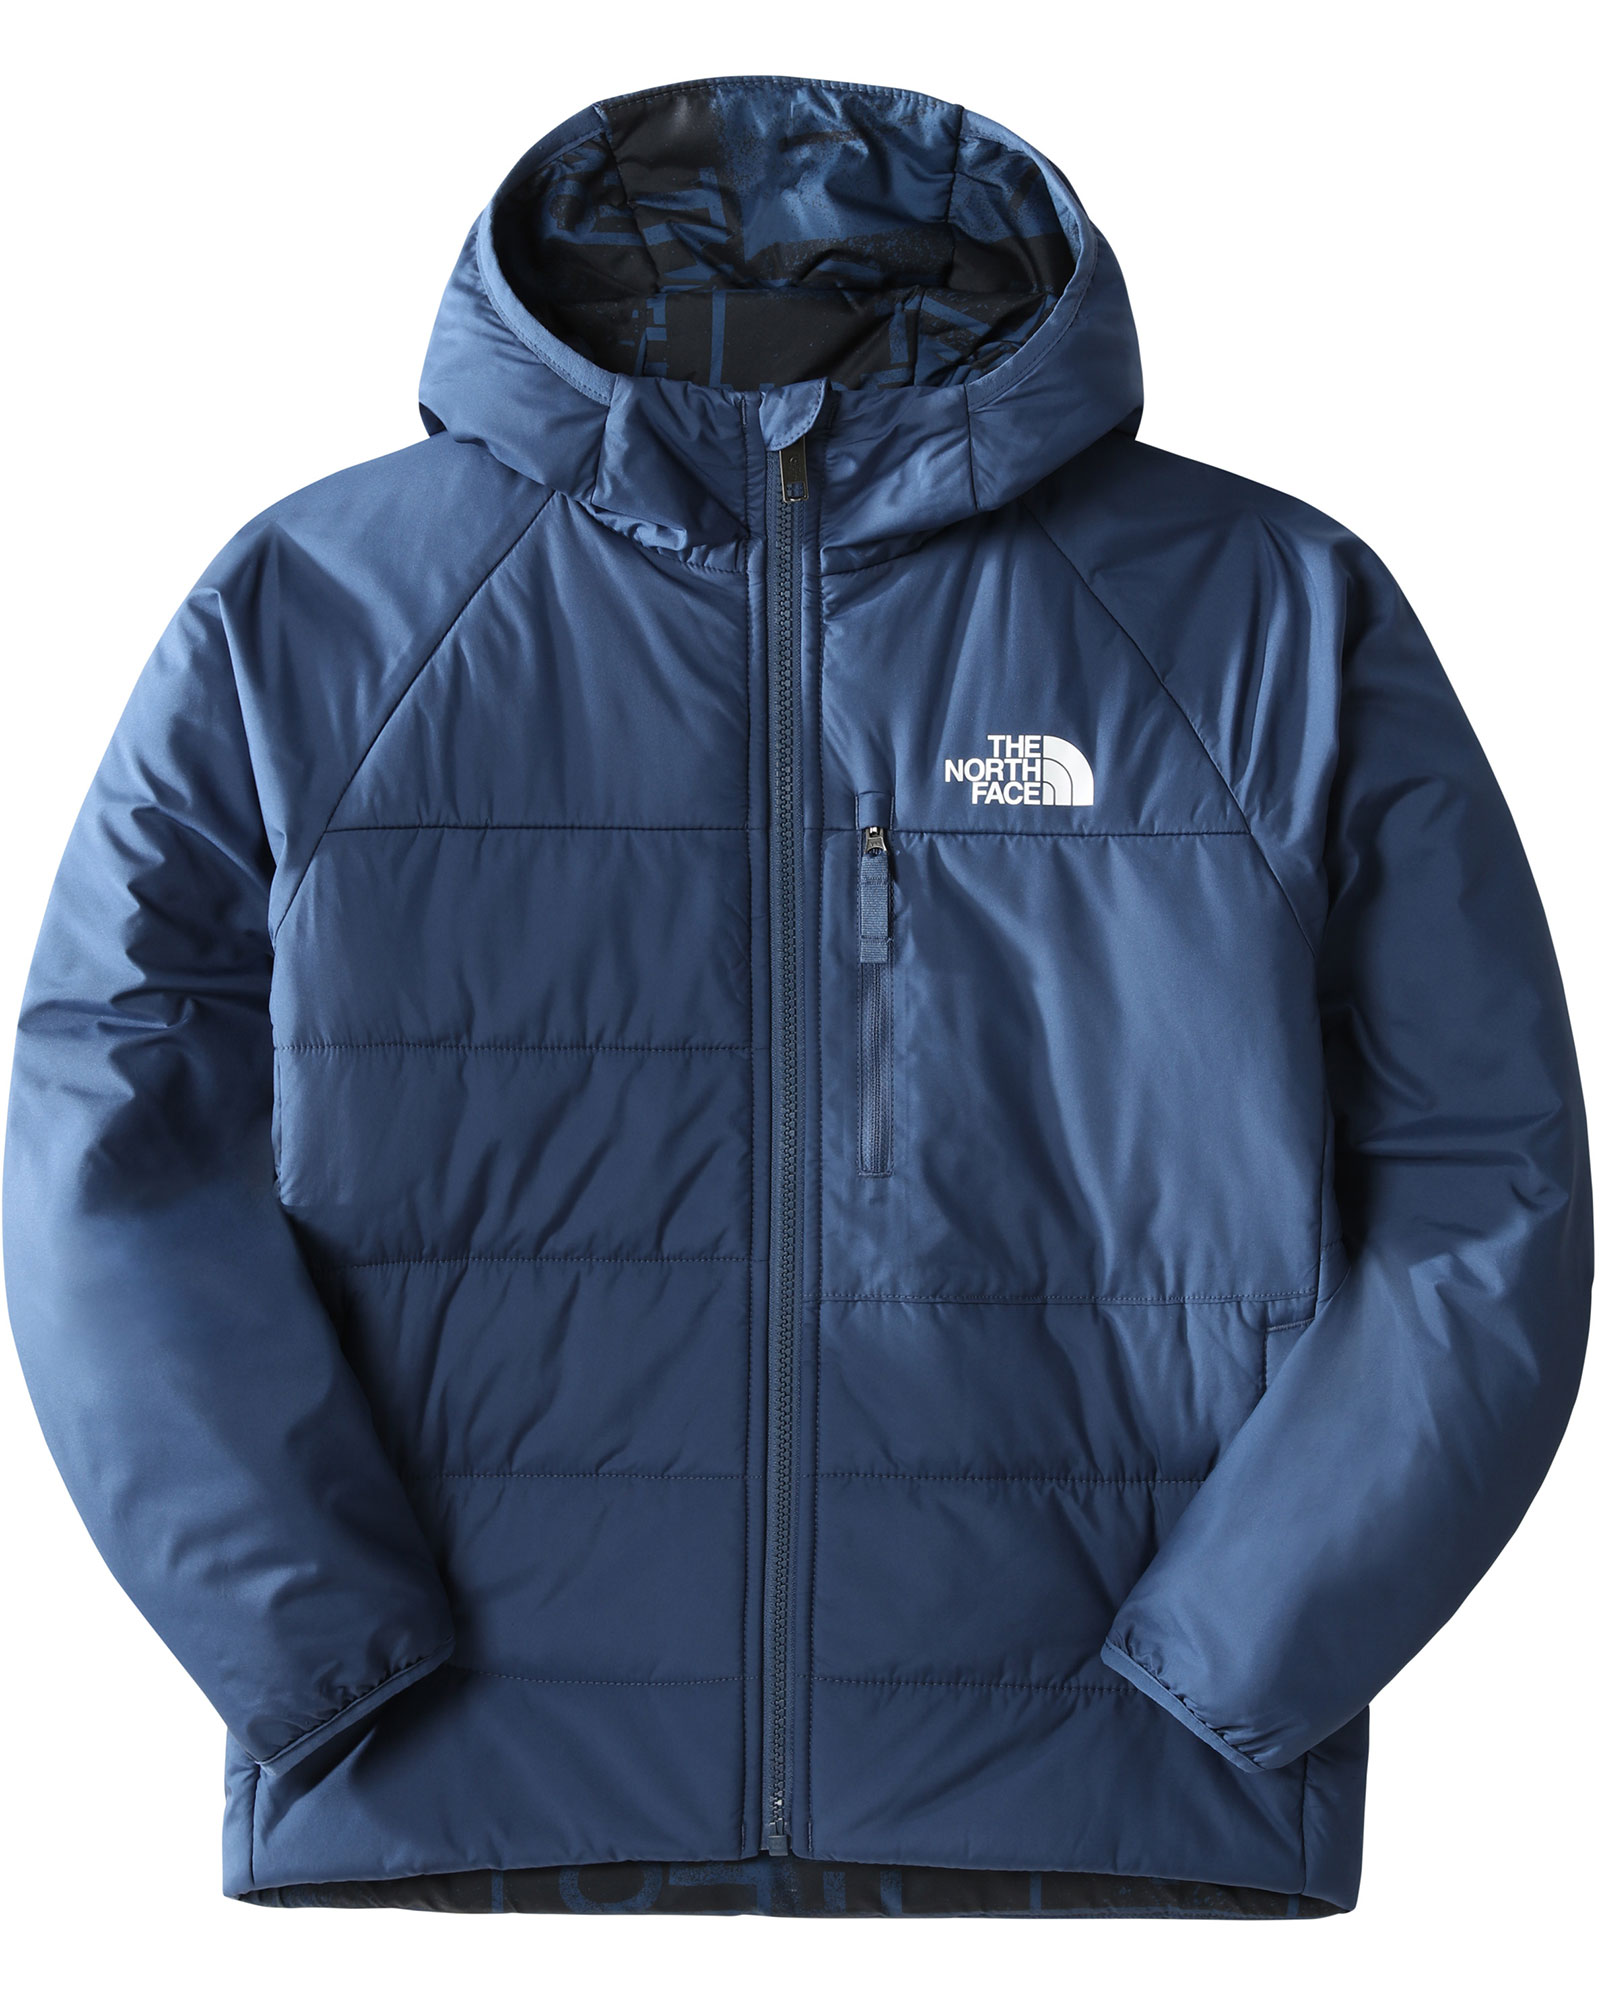 The North Face Reversible Perrito Kids’ Jacket - Shady Blue L